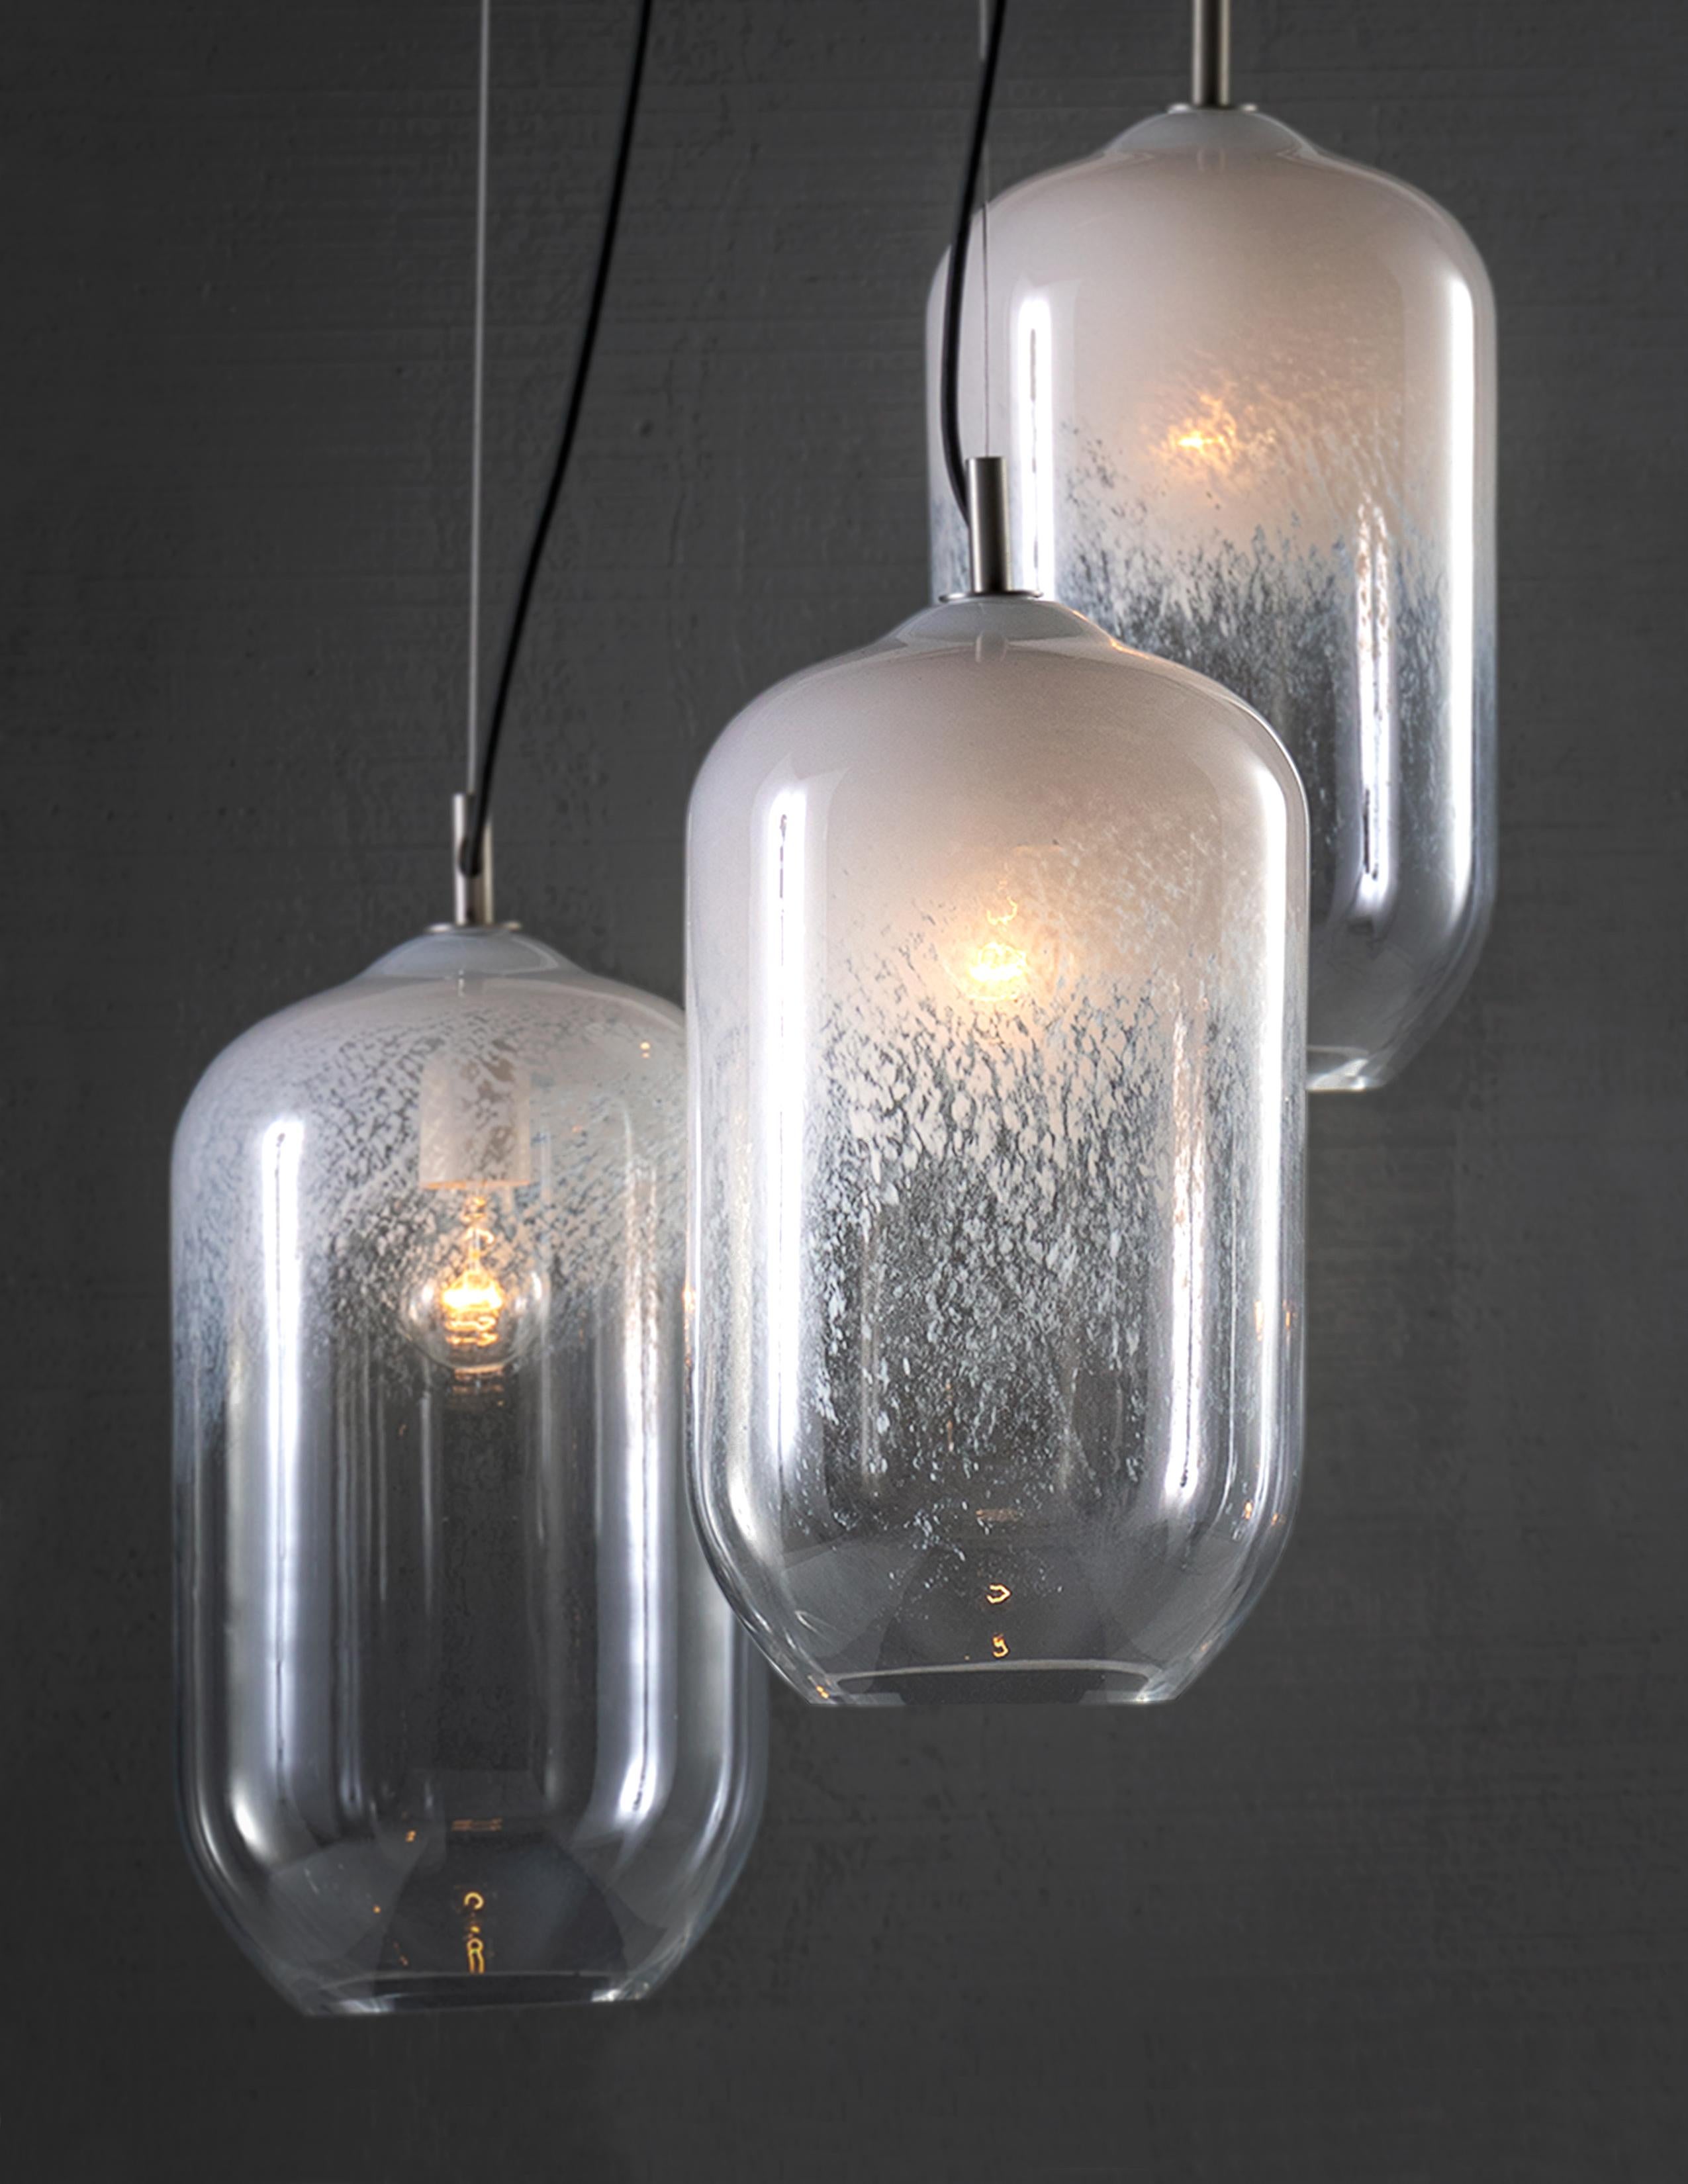 Decorative Glass. Mouth blown glass with variegated opaque tones

Bulb 1x medium base 60 watt incandescent

Handcrafted in Italy.

Minimum Hanging Height: N/A
Maximum Hanging Height: 72